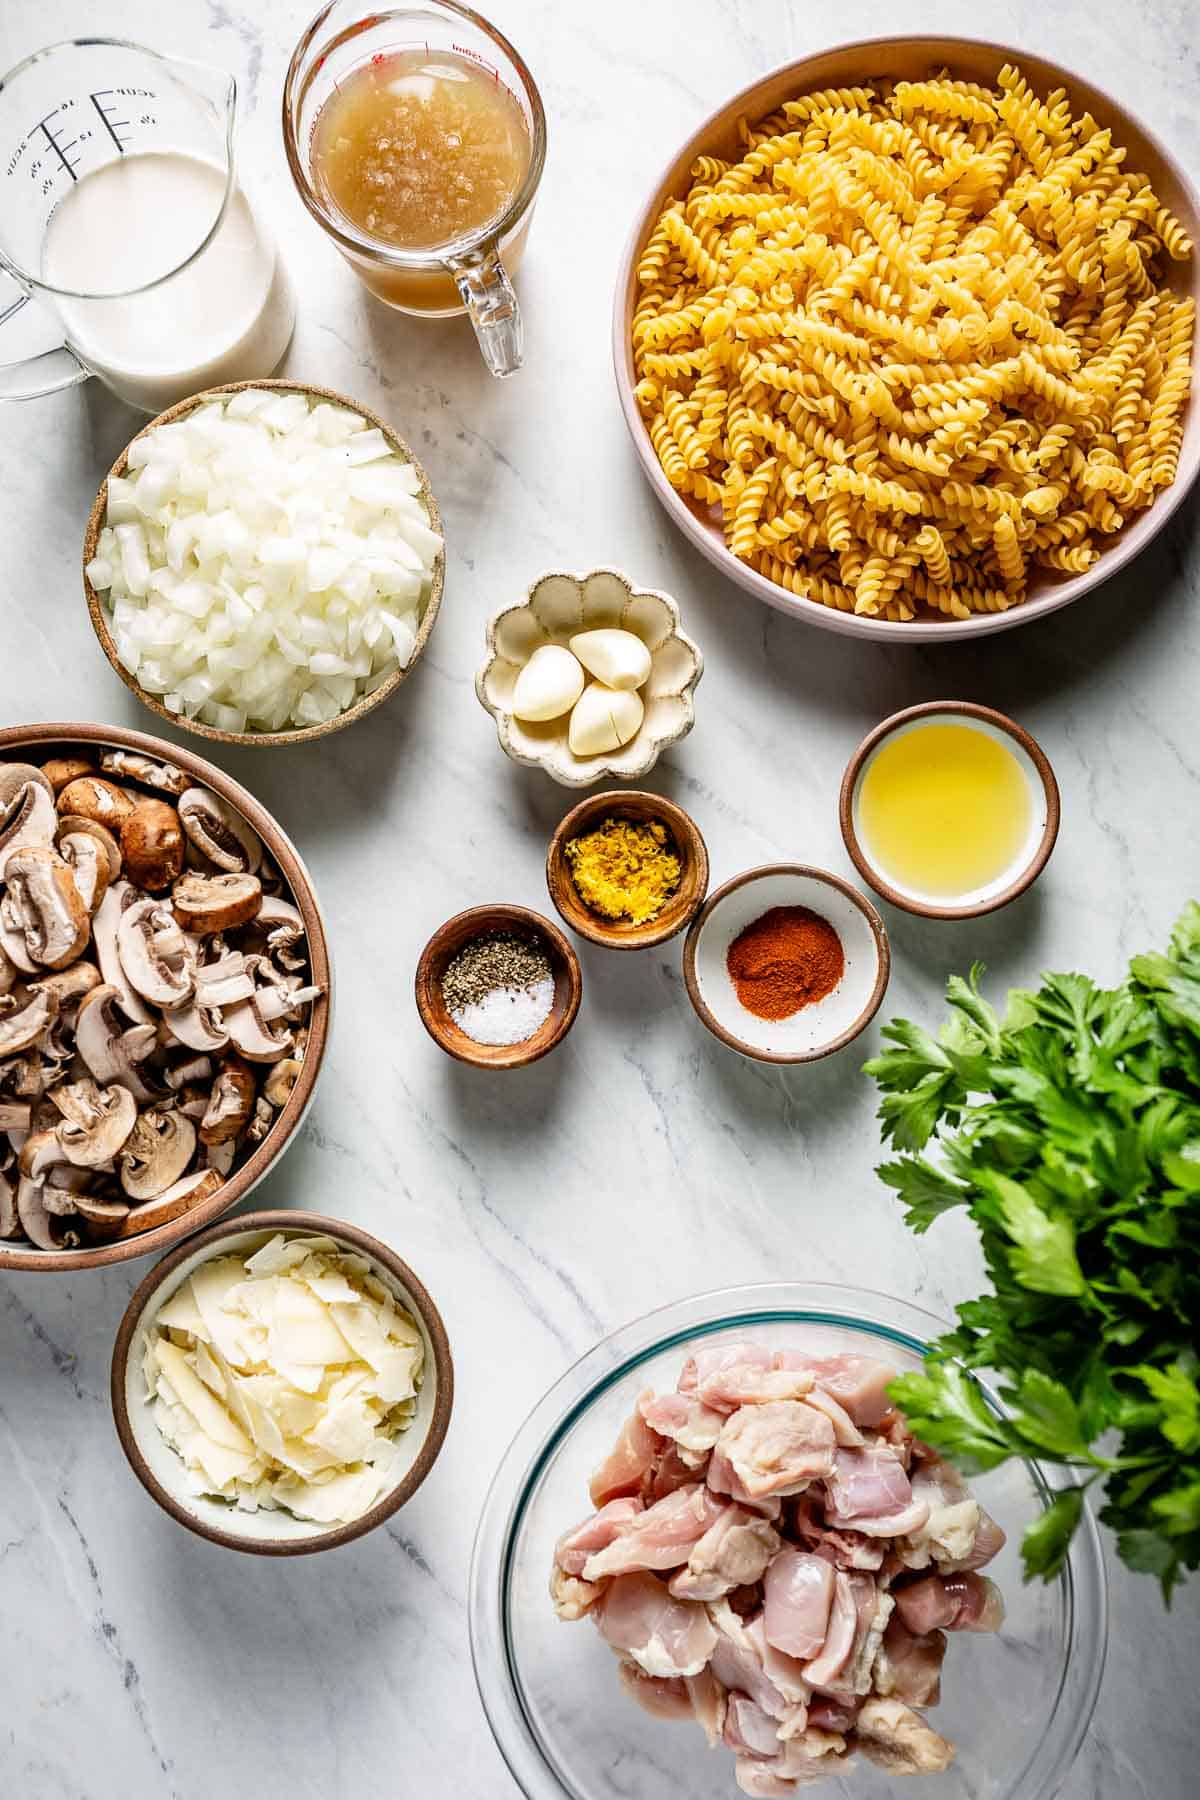 Ingredients for this chicken and mushroom pasta recipe are portioned and laid out on a marble backdrop